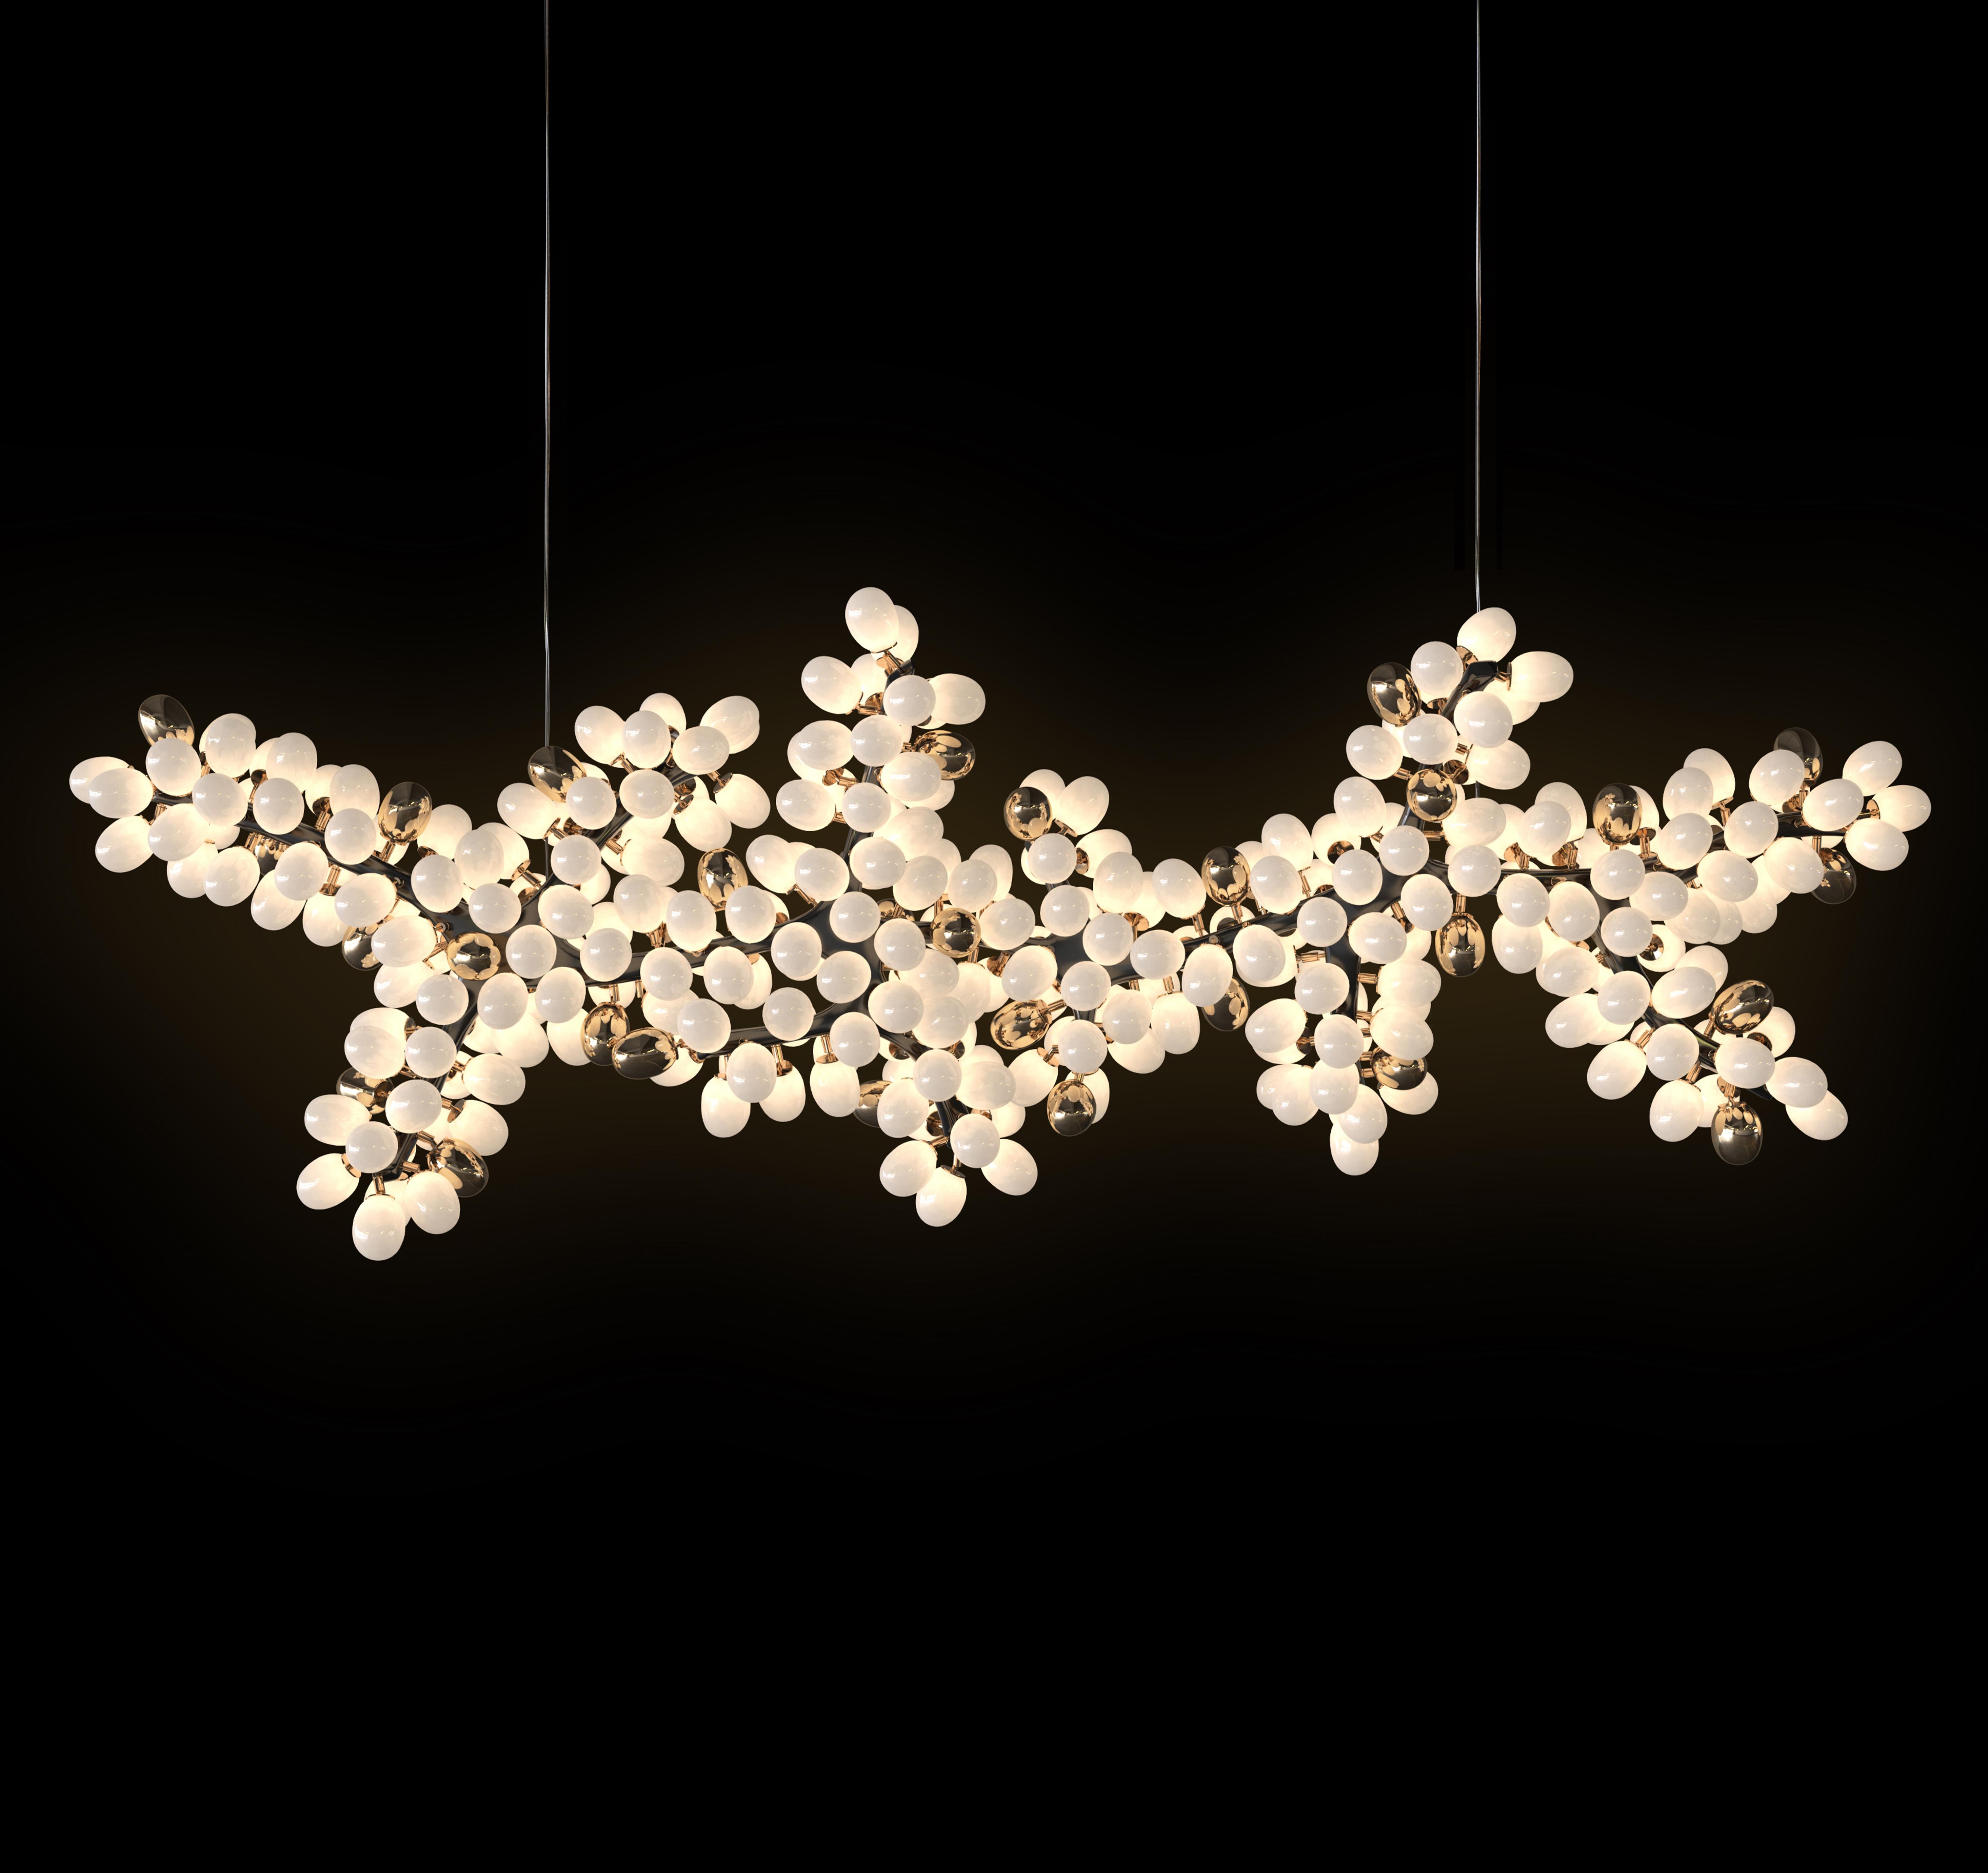 The spectacular Valiant Chandelier by Barlas Baylar is inspired by the resplendent natural forms of ancient flora.  The Valiant Collection is rigorously crafted in hand-blown Murano glass and solid sculpted bronze (or stainless steel.)

With a